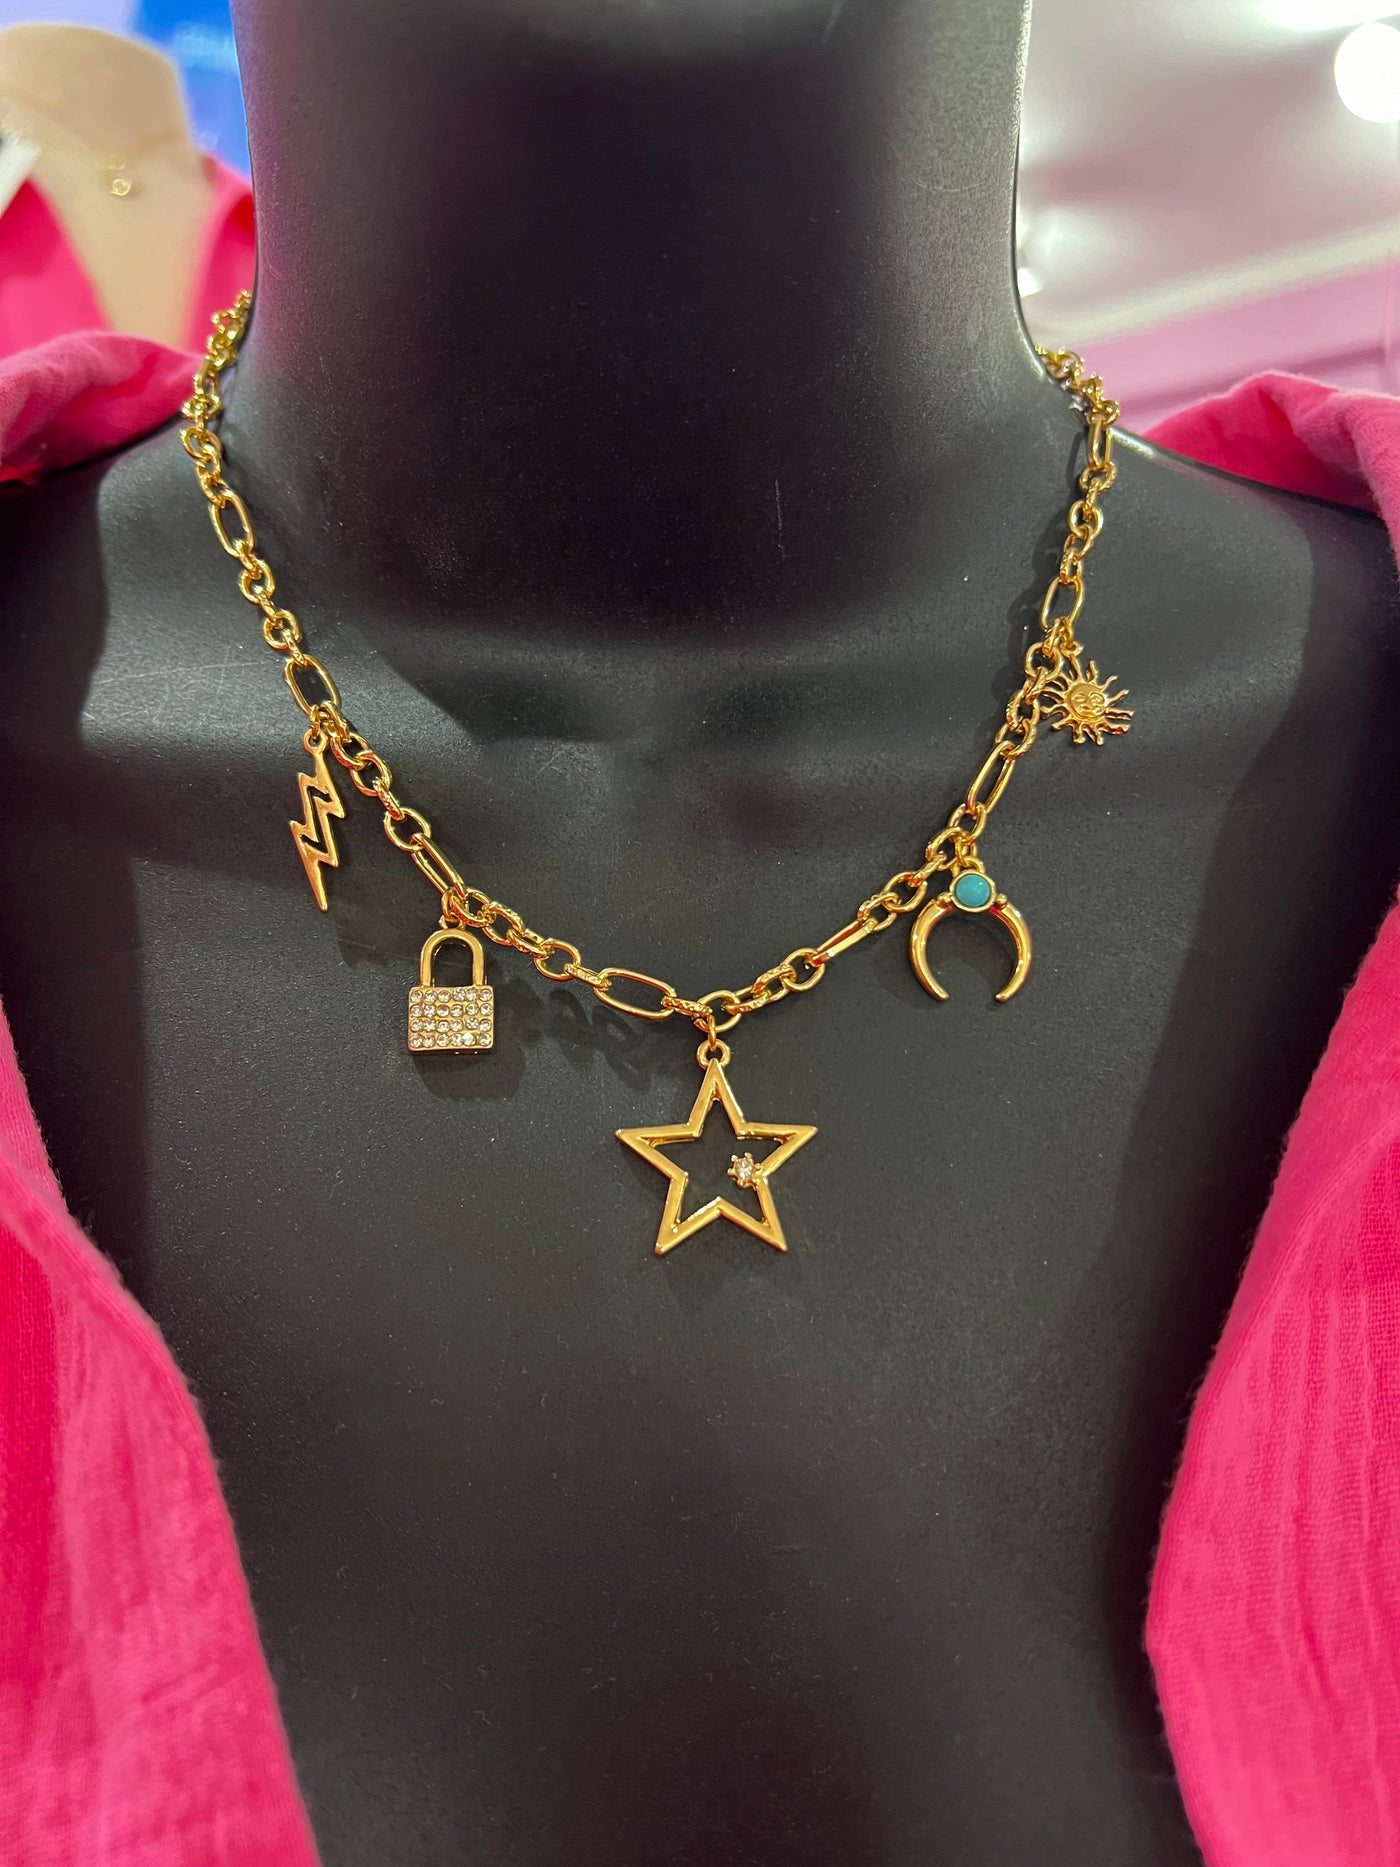 Shining Star Charm Necklace